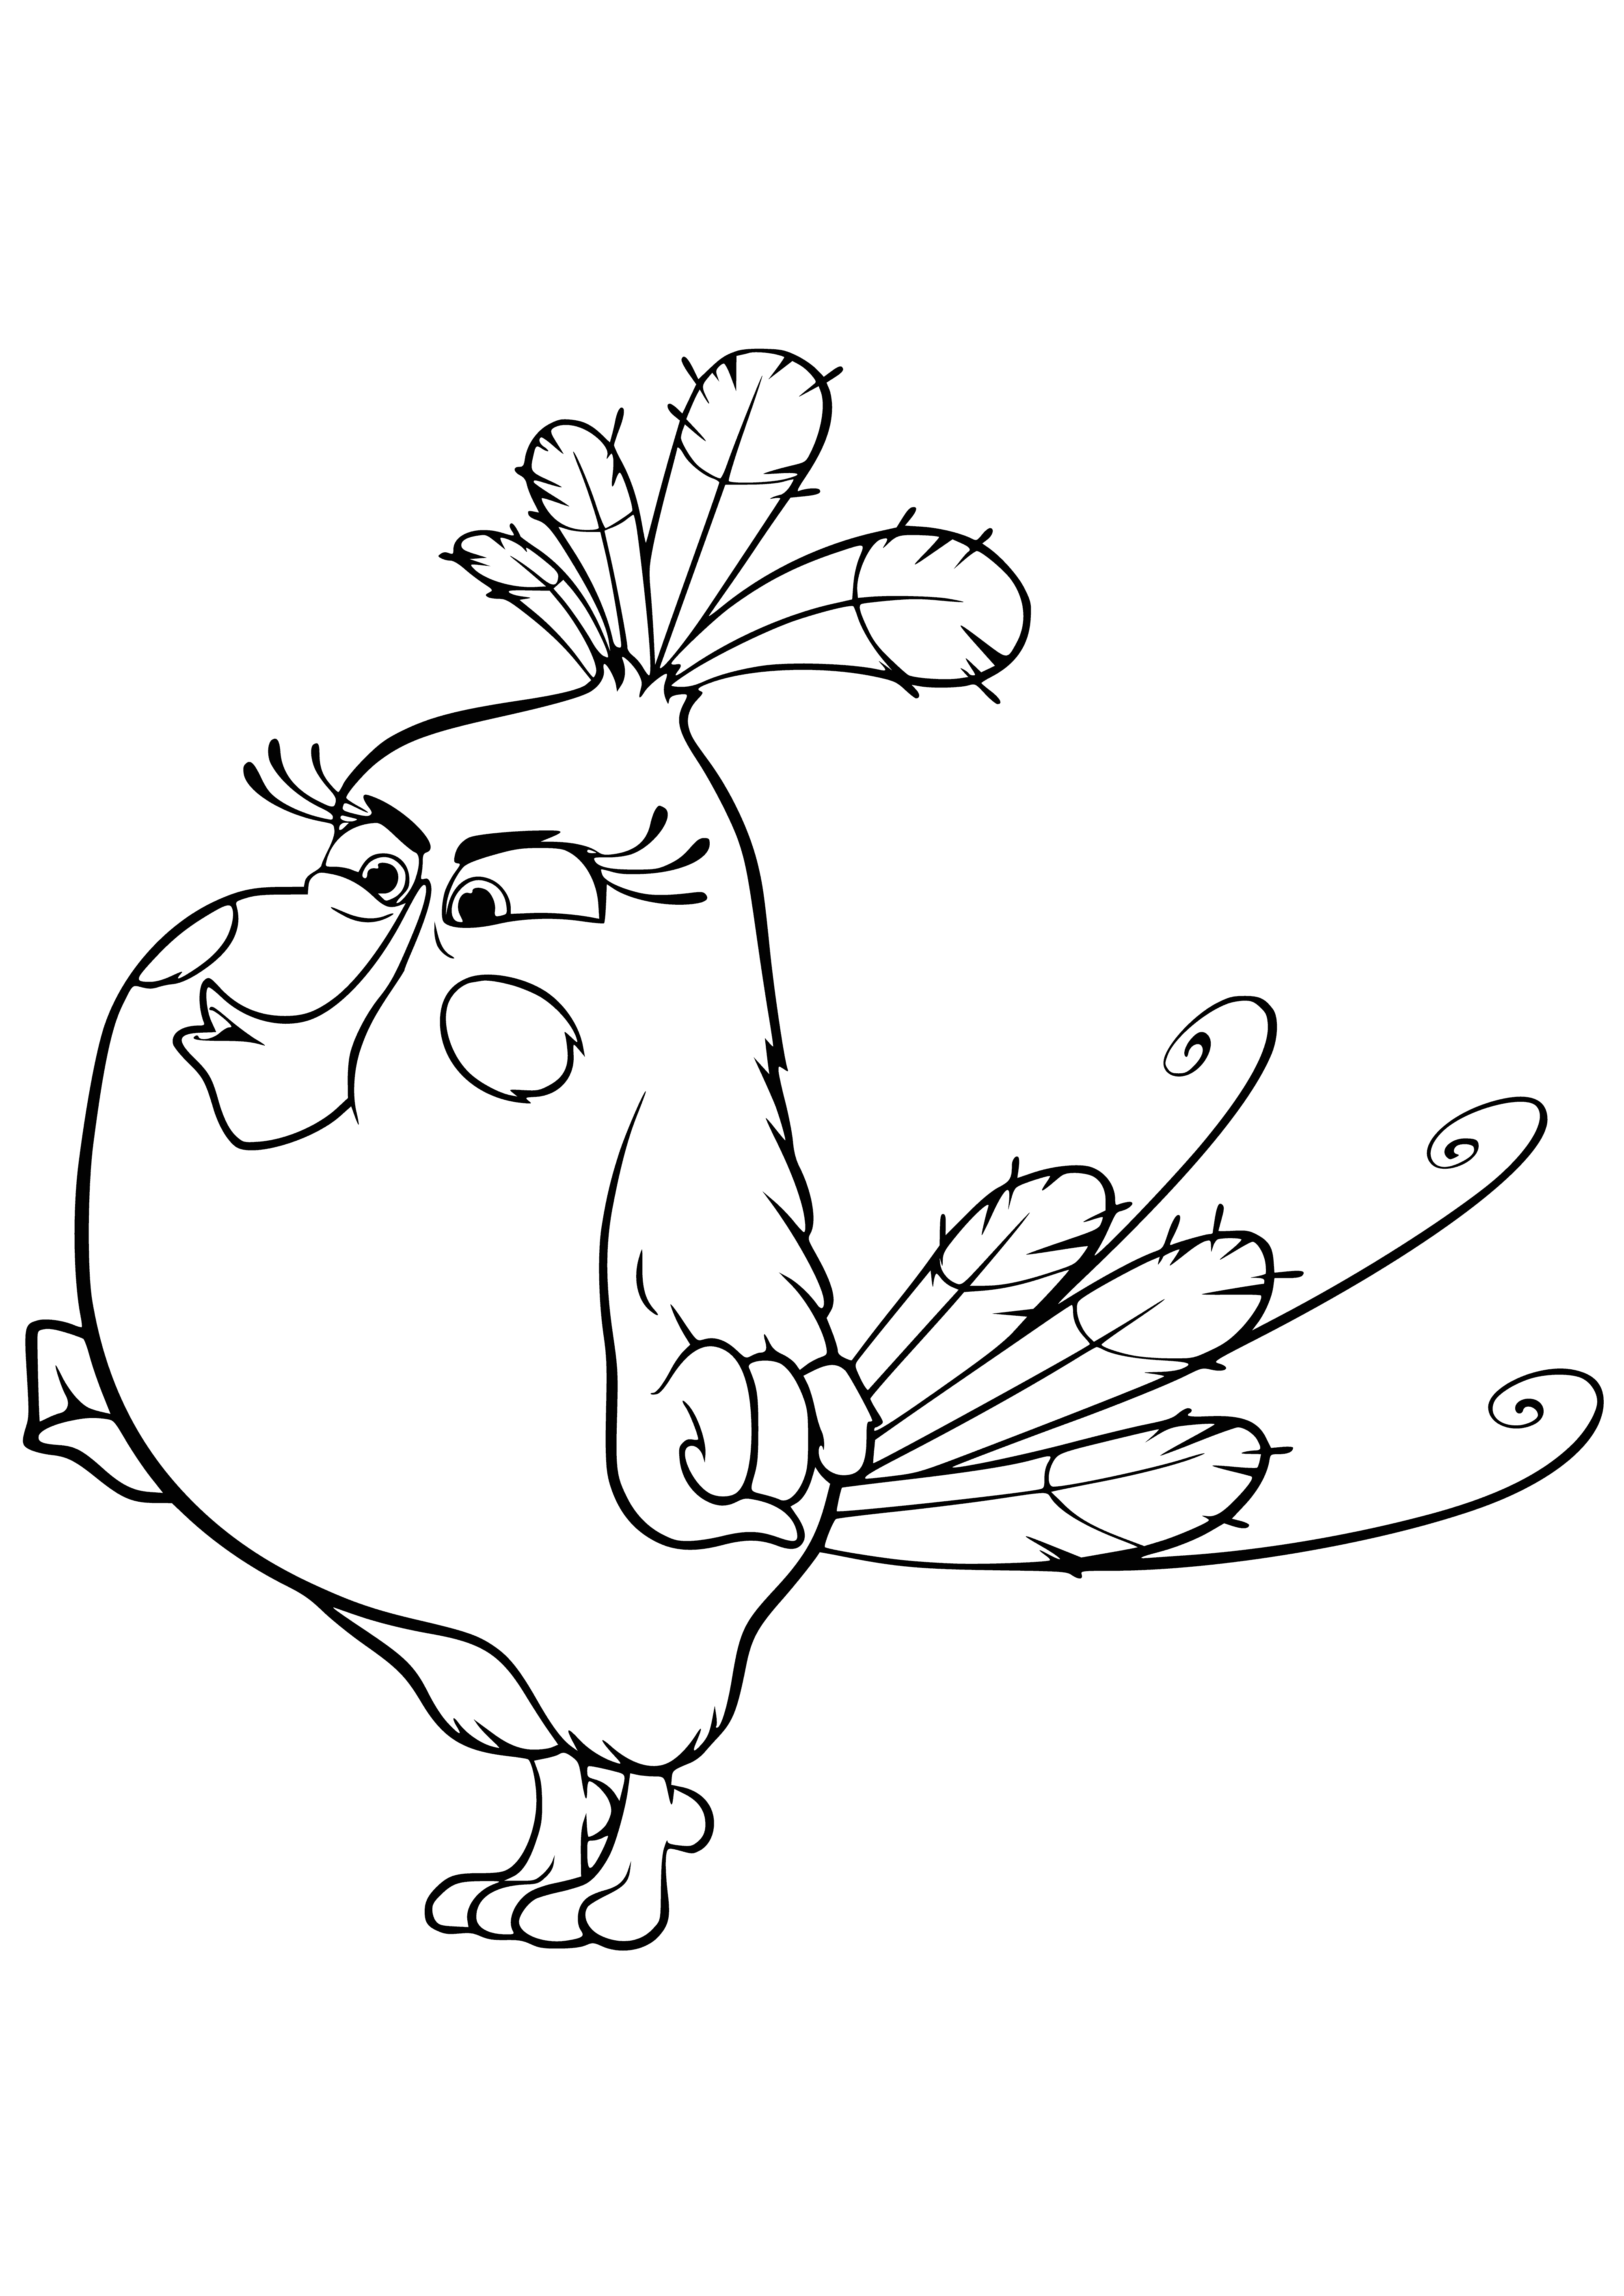 coloring page: Matilda the Angry Bird has a white body, red head, large bill, & black eyes; an angry expression & ready to take flight!